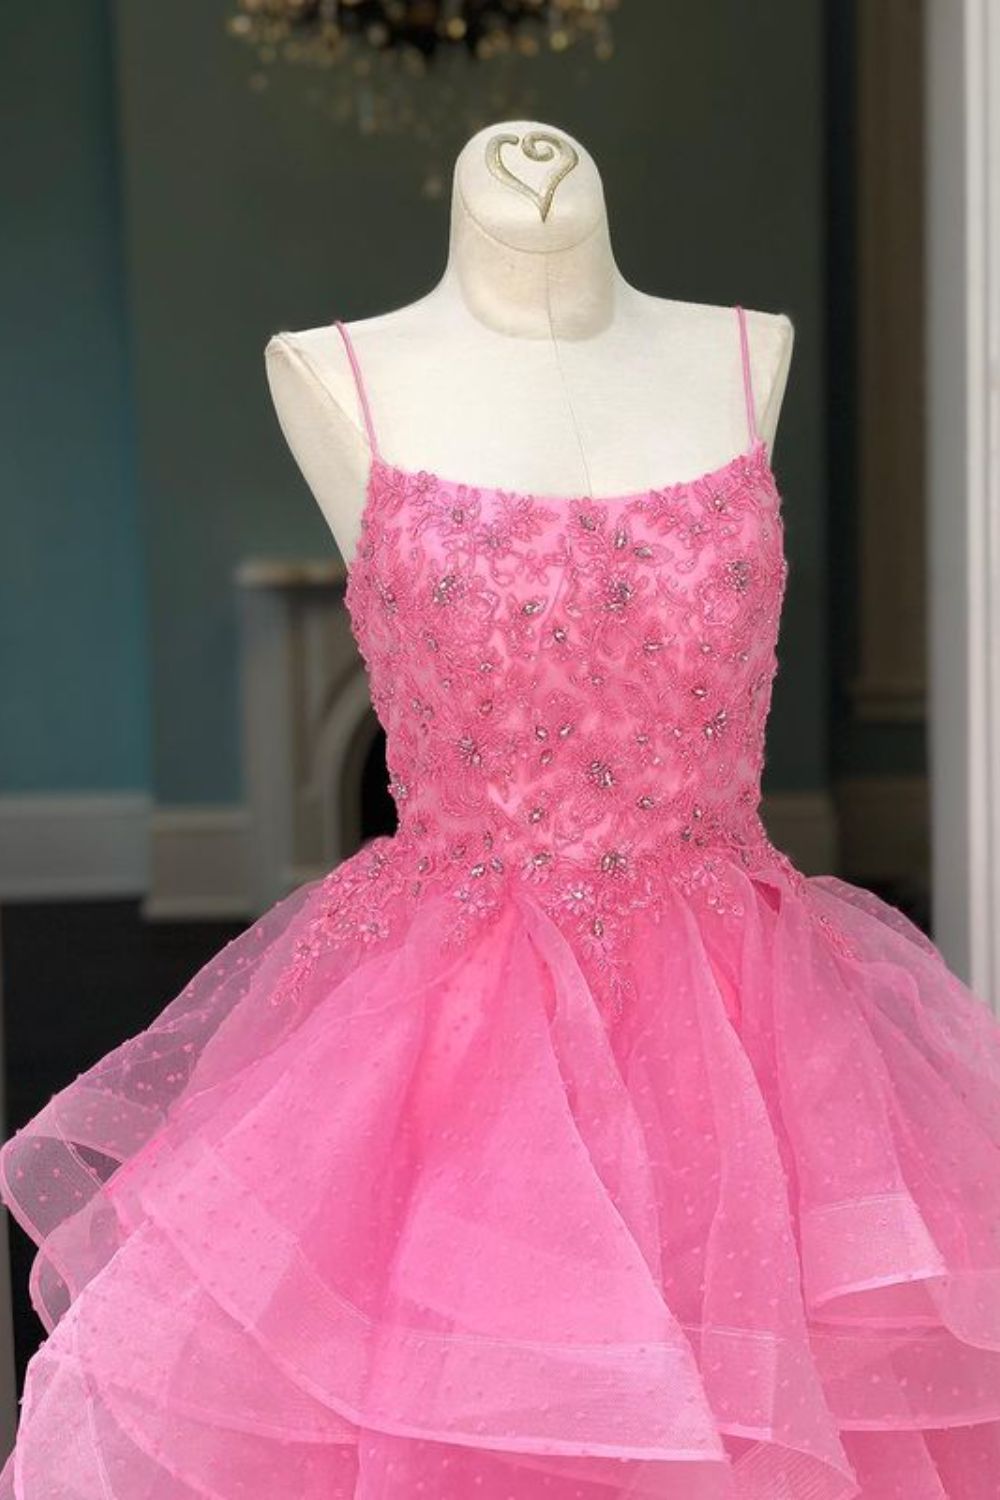 Dressime Asymmetrical A Line Spaghetti Straps Tulle Appliqes Ruffled Long Prom Dress with Beaded